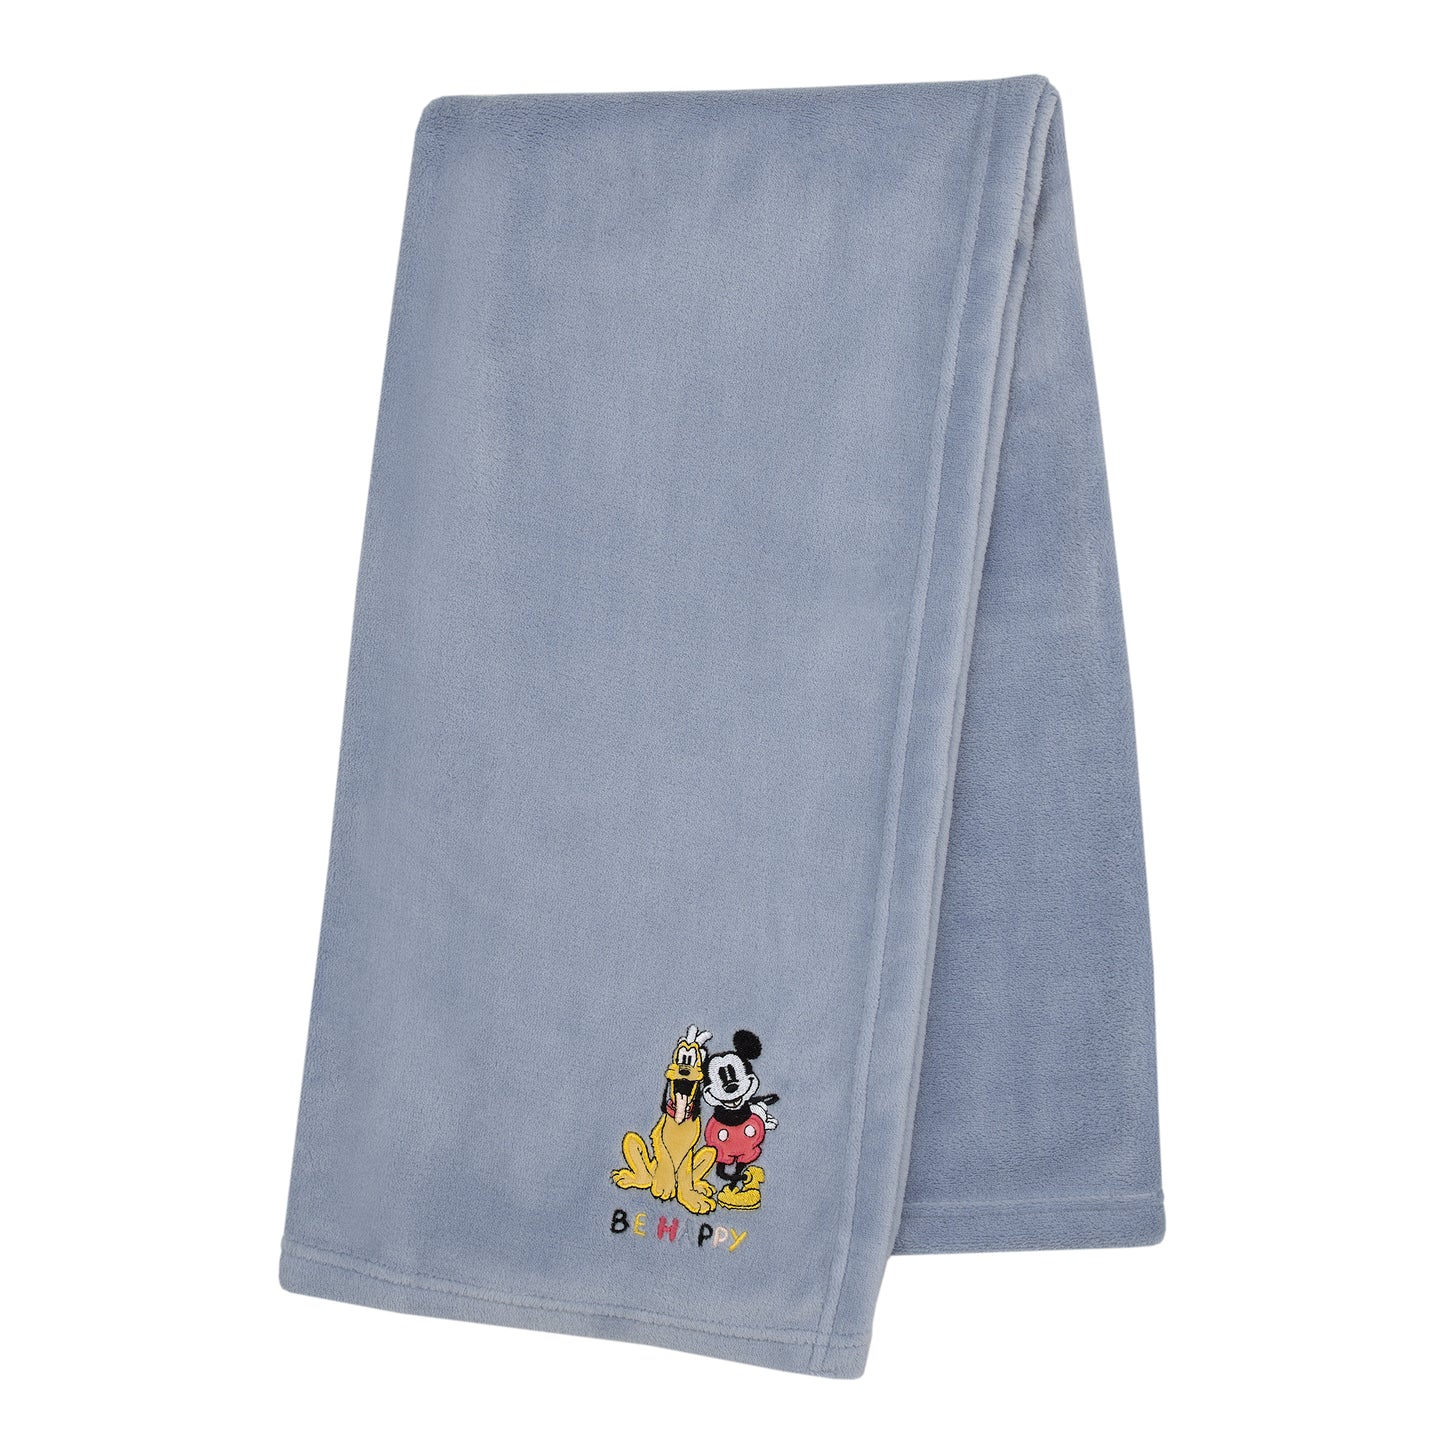 Disney Mickey and Friends Blue, Gold and Red Pluto and Mickey Mouse Be Happy Super Soft Appliqued Baby Blanket